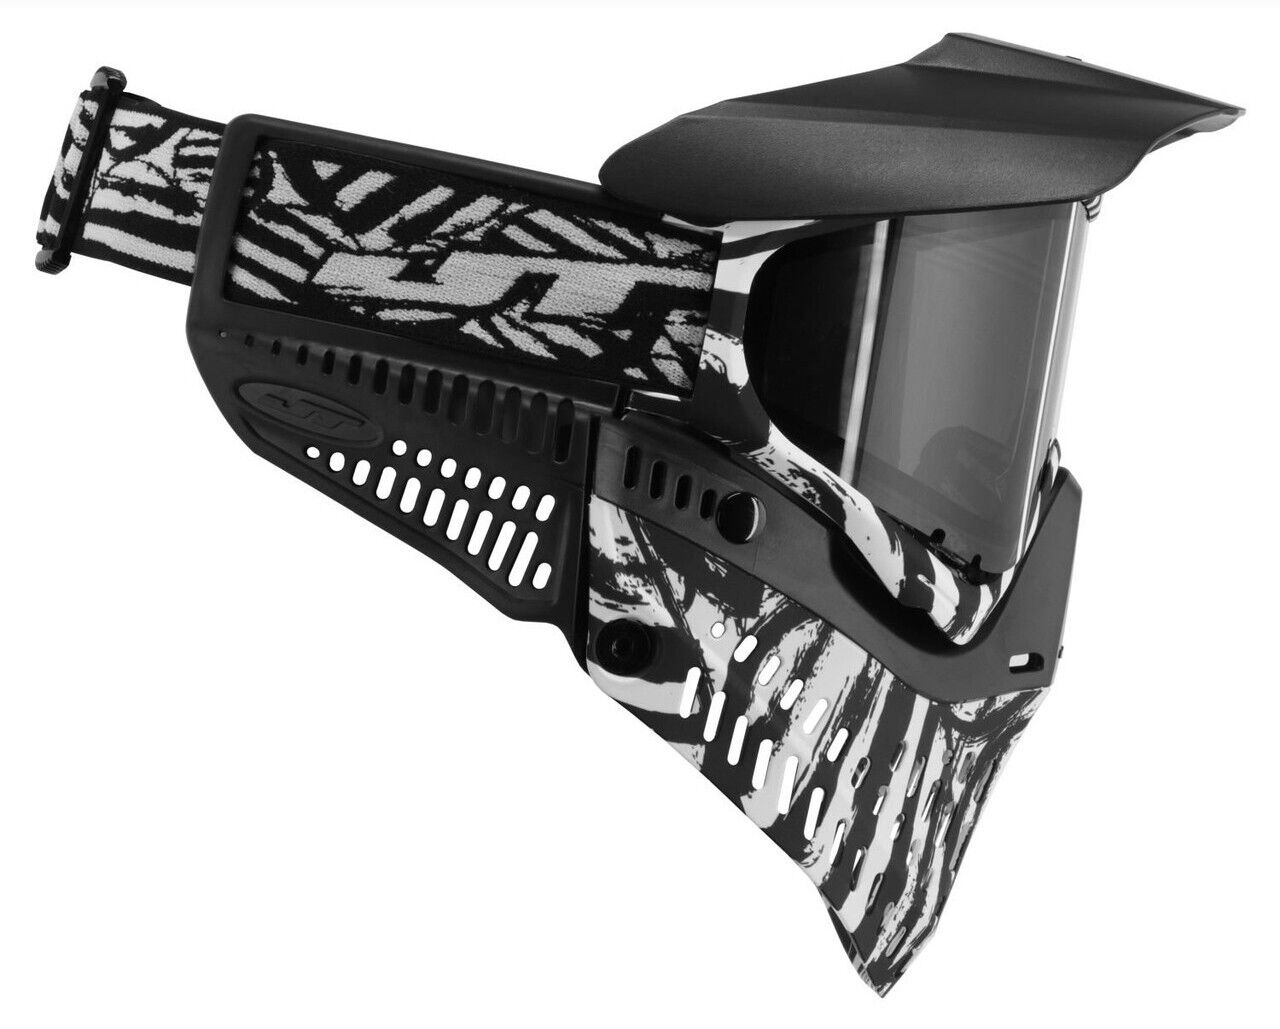 JT Spectra Proflex LE Goggle - Zebra w/ Clear and Smoke Thermal Lens